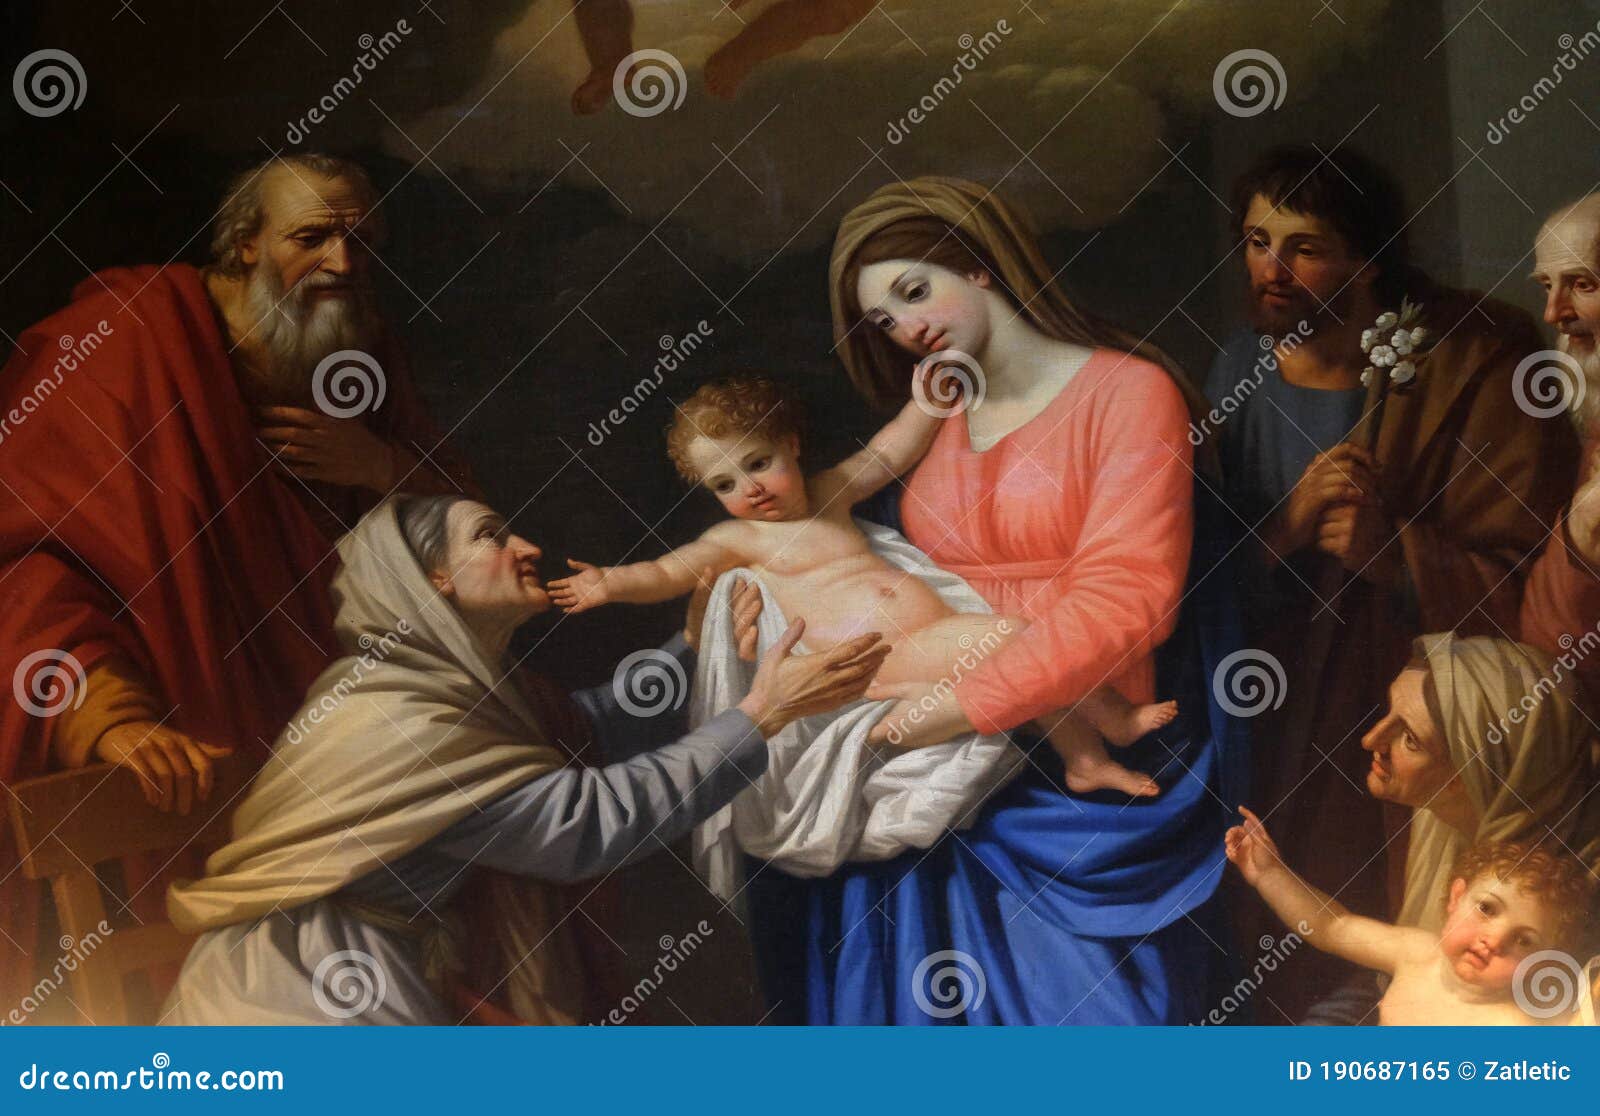 saint anne adores the child by stefano tofanelli, basilica of saint frediano, lucca, italy